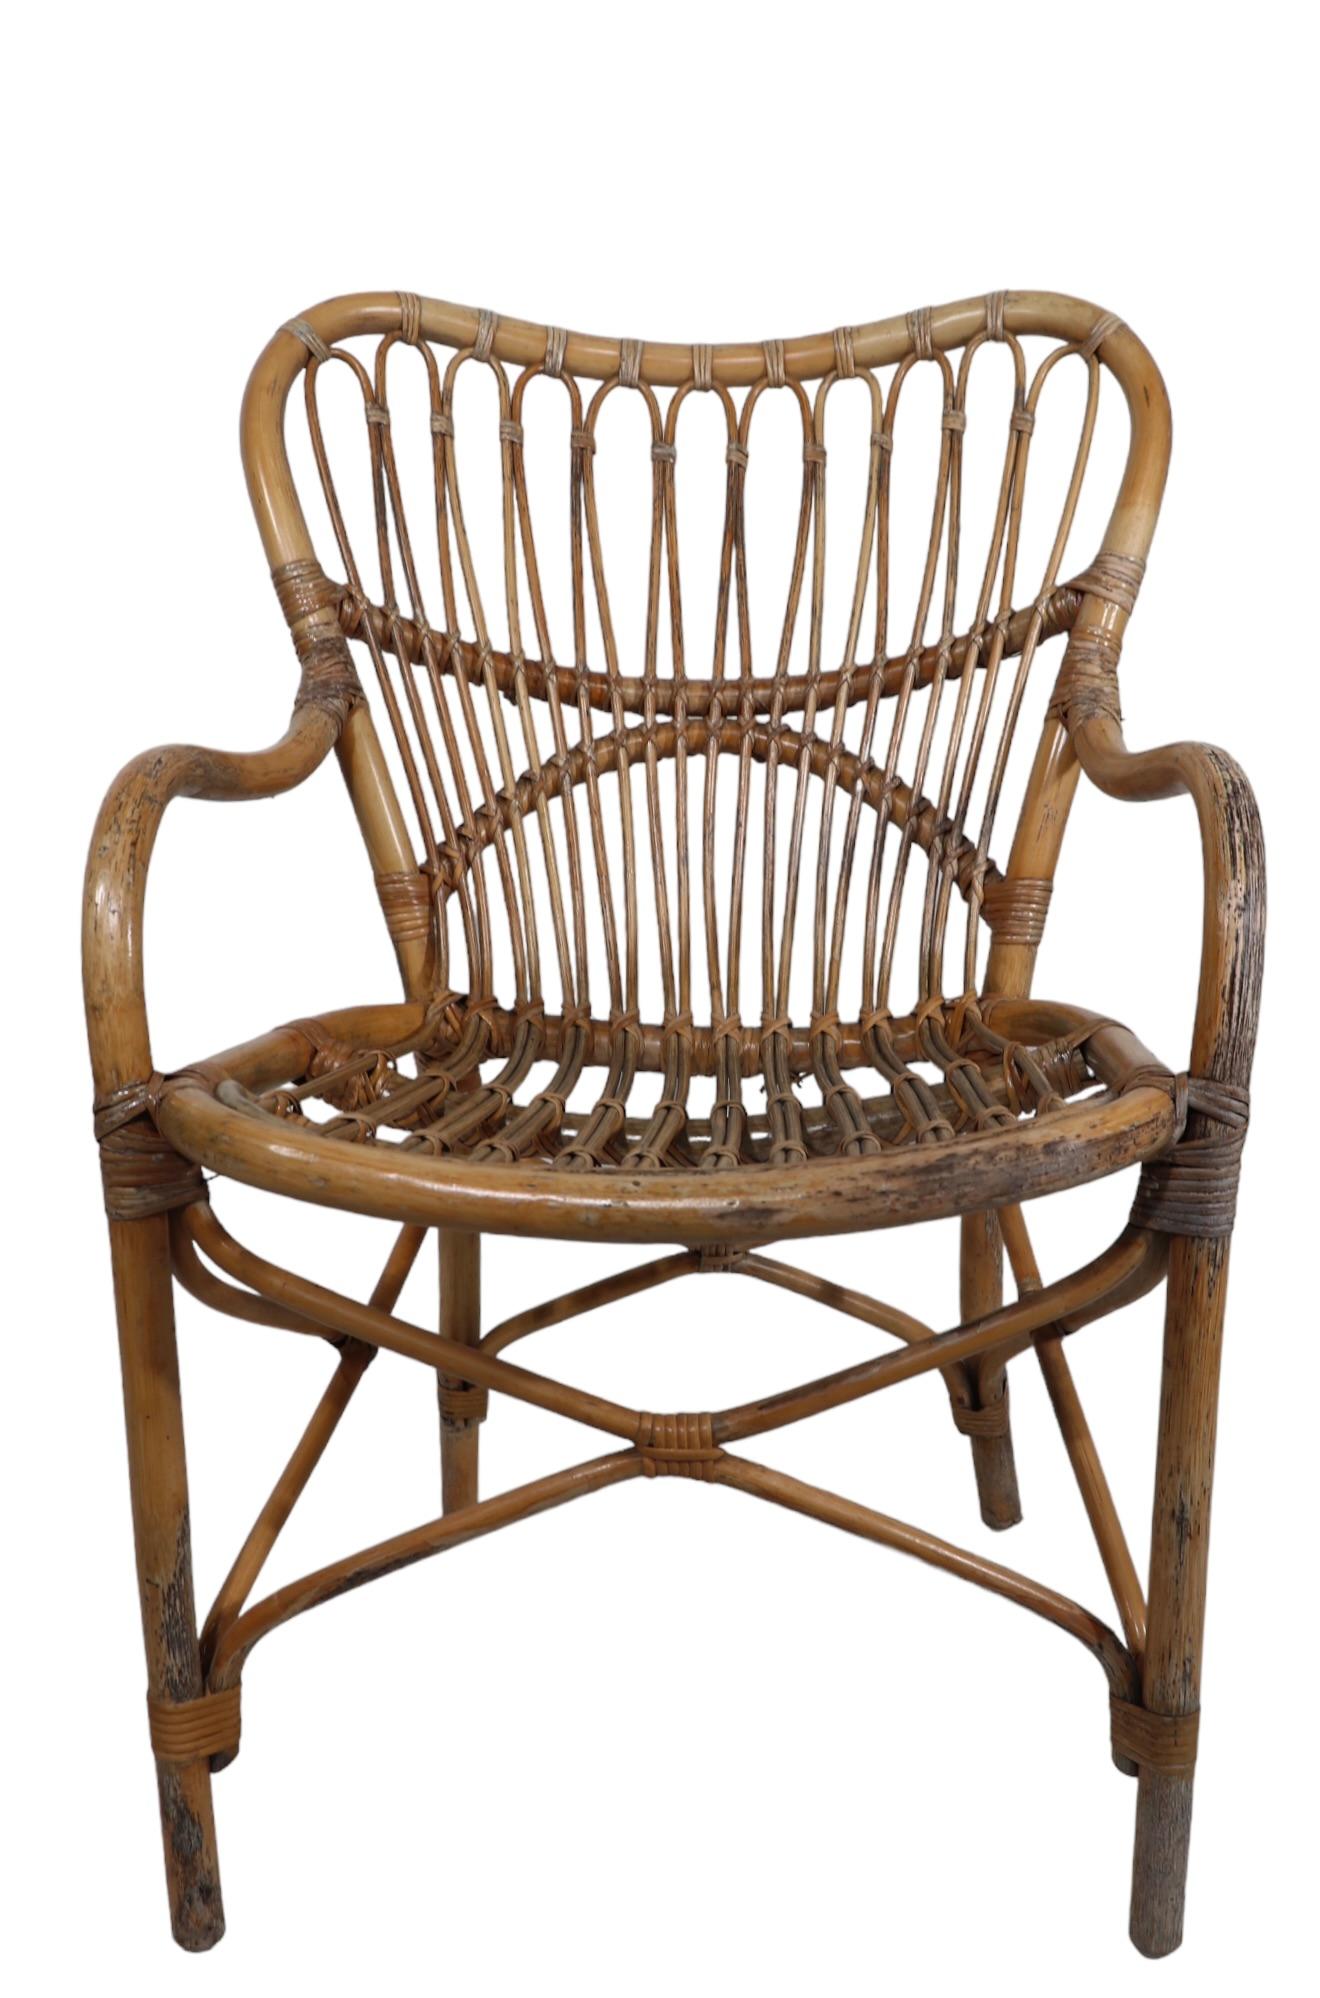 Bamboo Arm Chair in the style of Vittorio Bonacina  Franco Albini c 1950's  In Good Condition For Sale In New York, NY